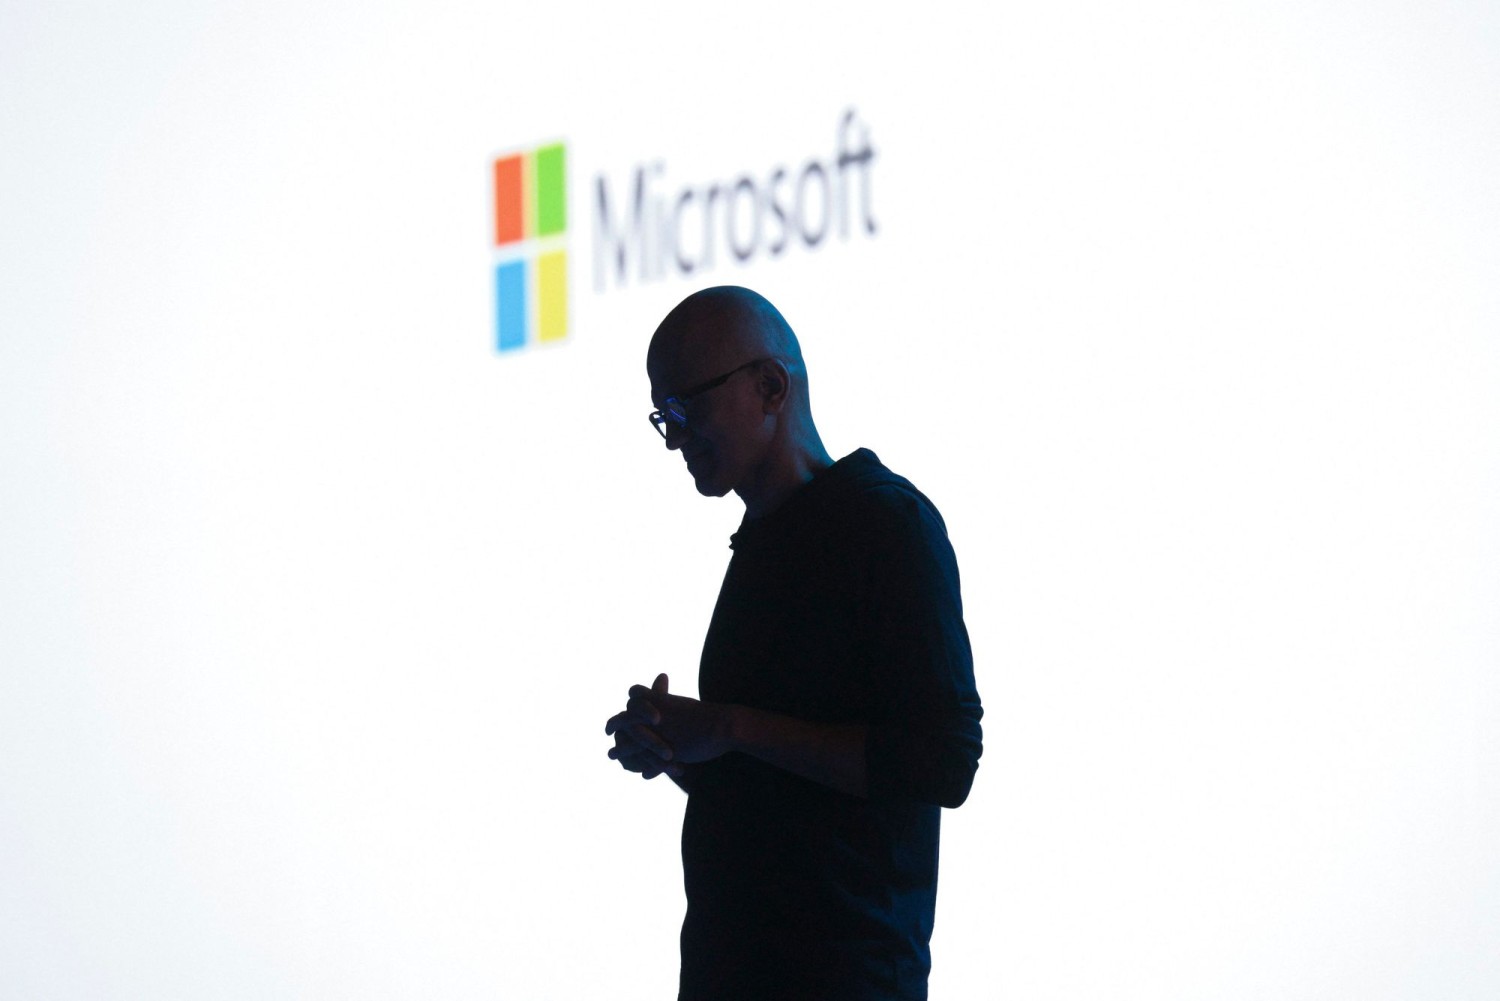 Satya Nadella at the Microsoft Build conference in Seattle last month. JASON REDMOND/AGENCE FRANCE-PRESSE/GETTY IMAGES